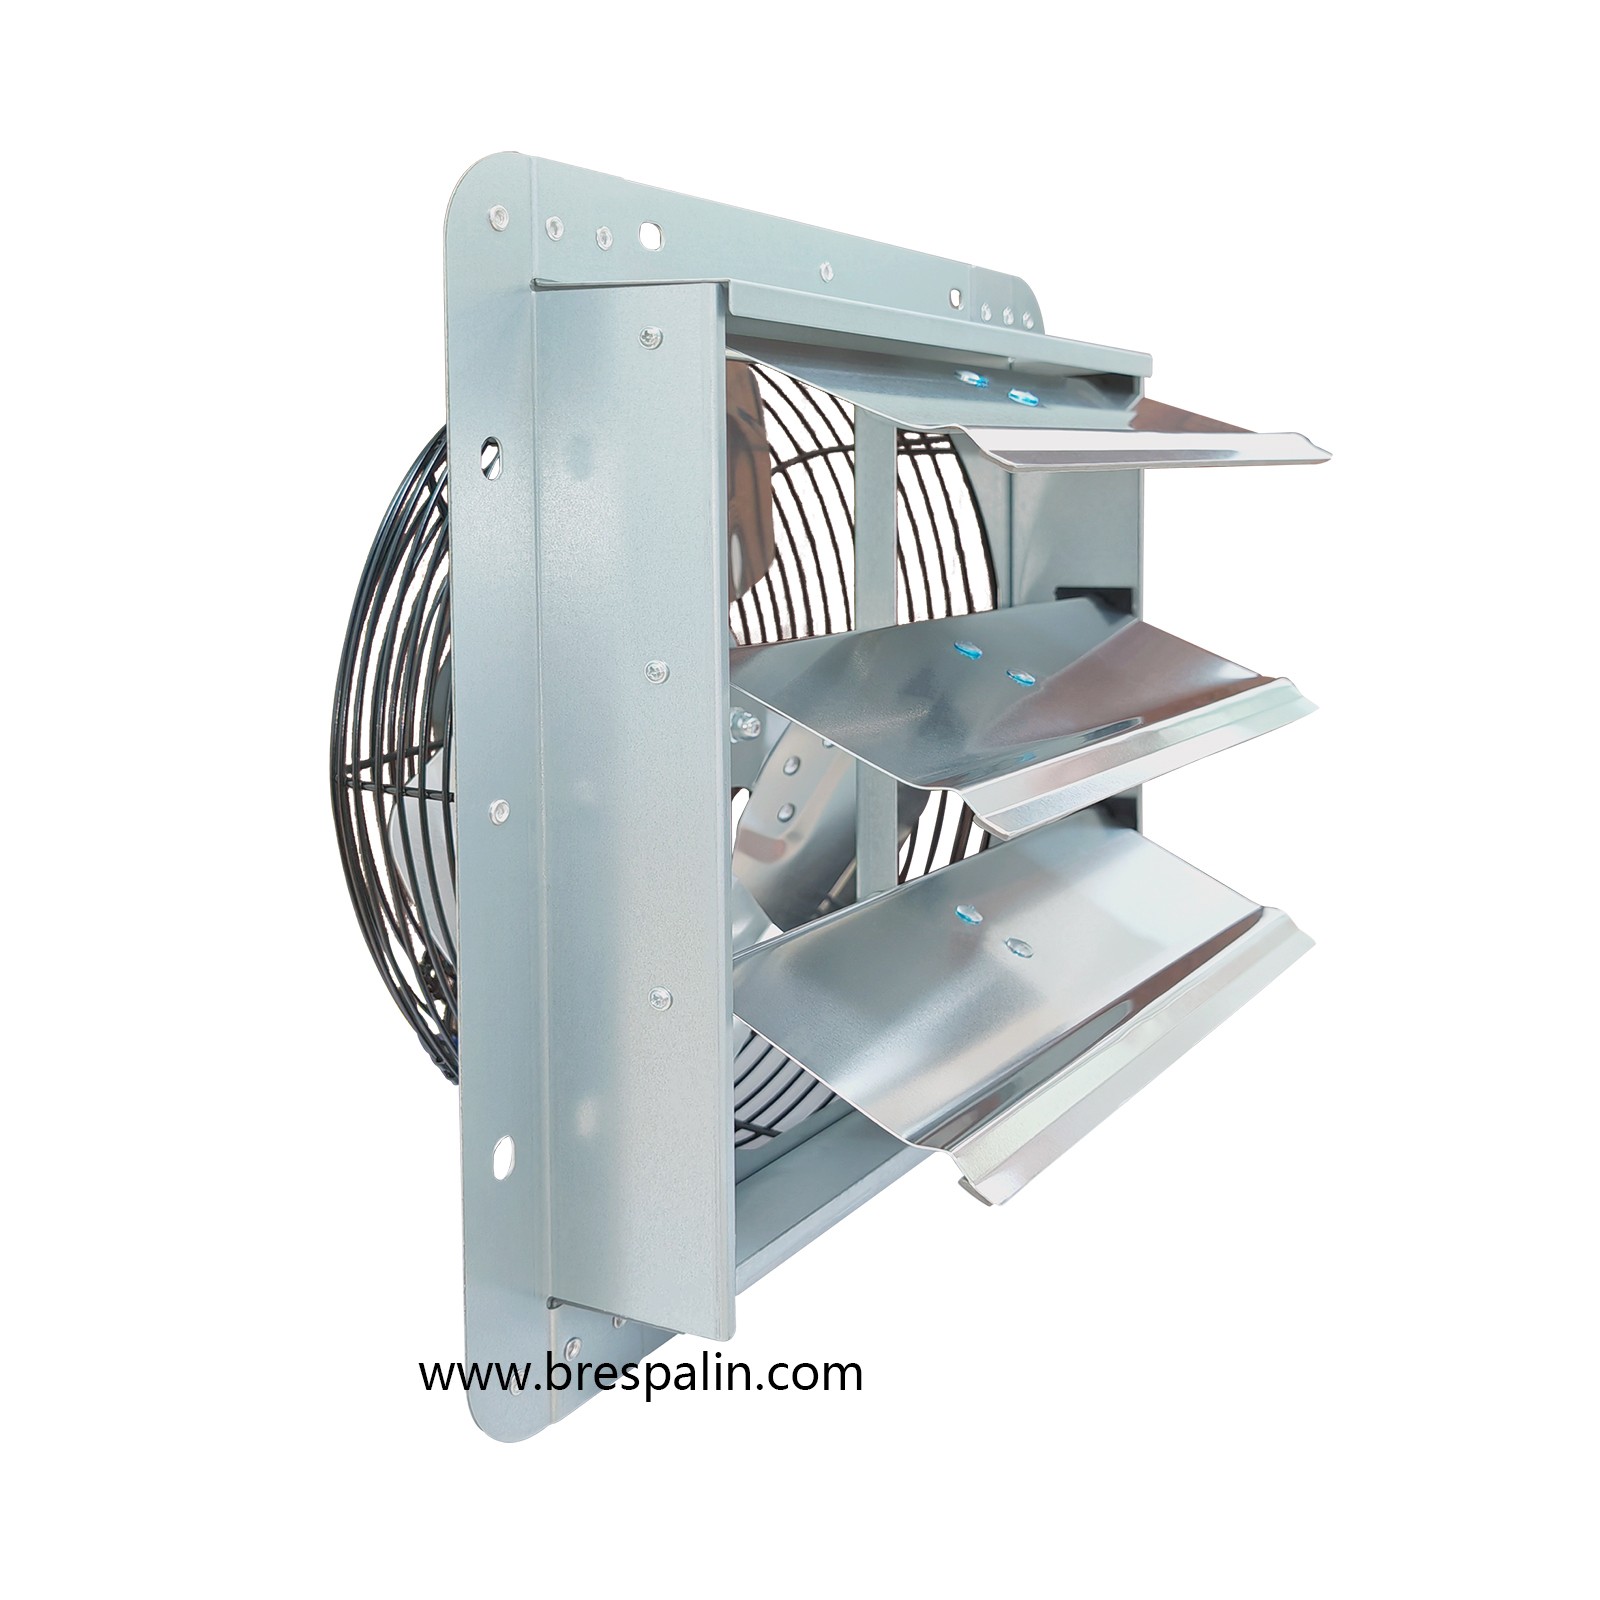 High Quality Ball Bearing Axial Exhaust Fan for Warehouse 8 inch